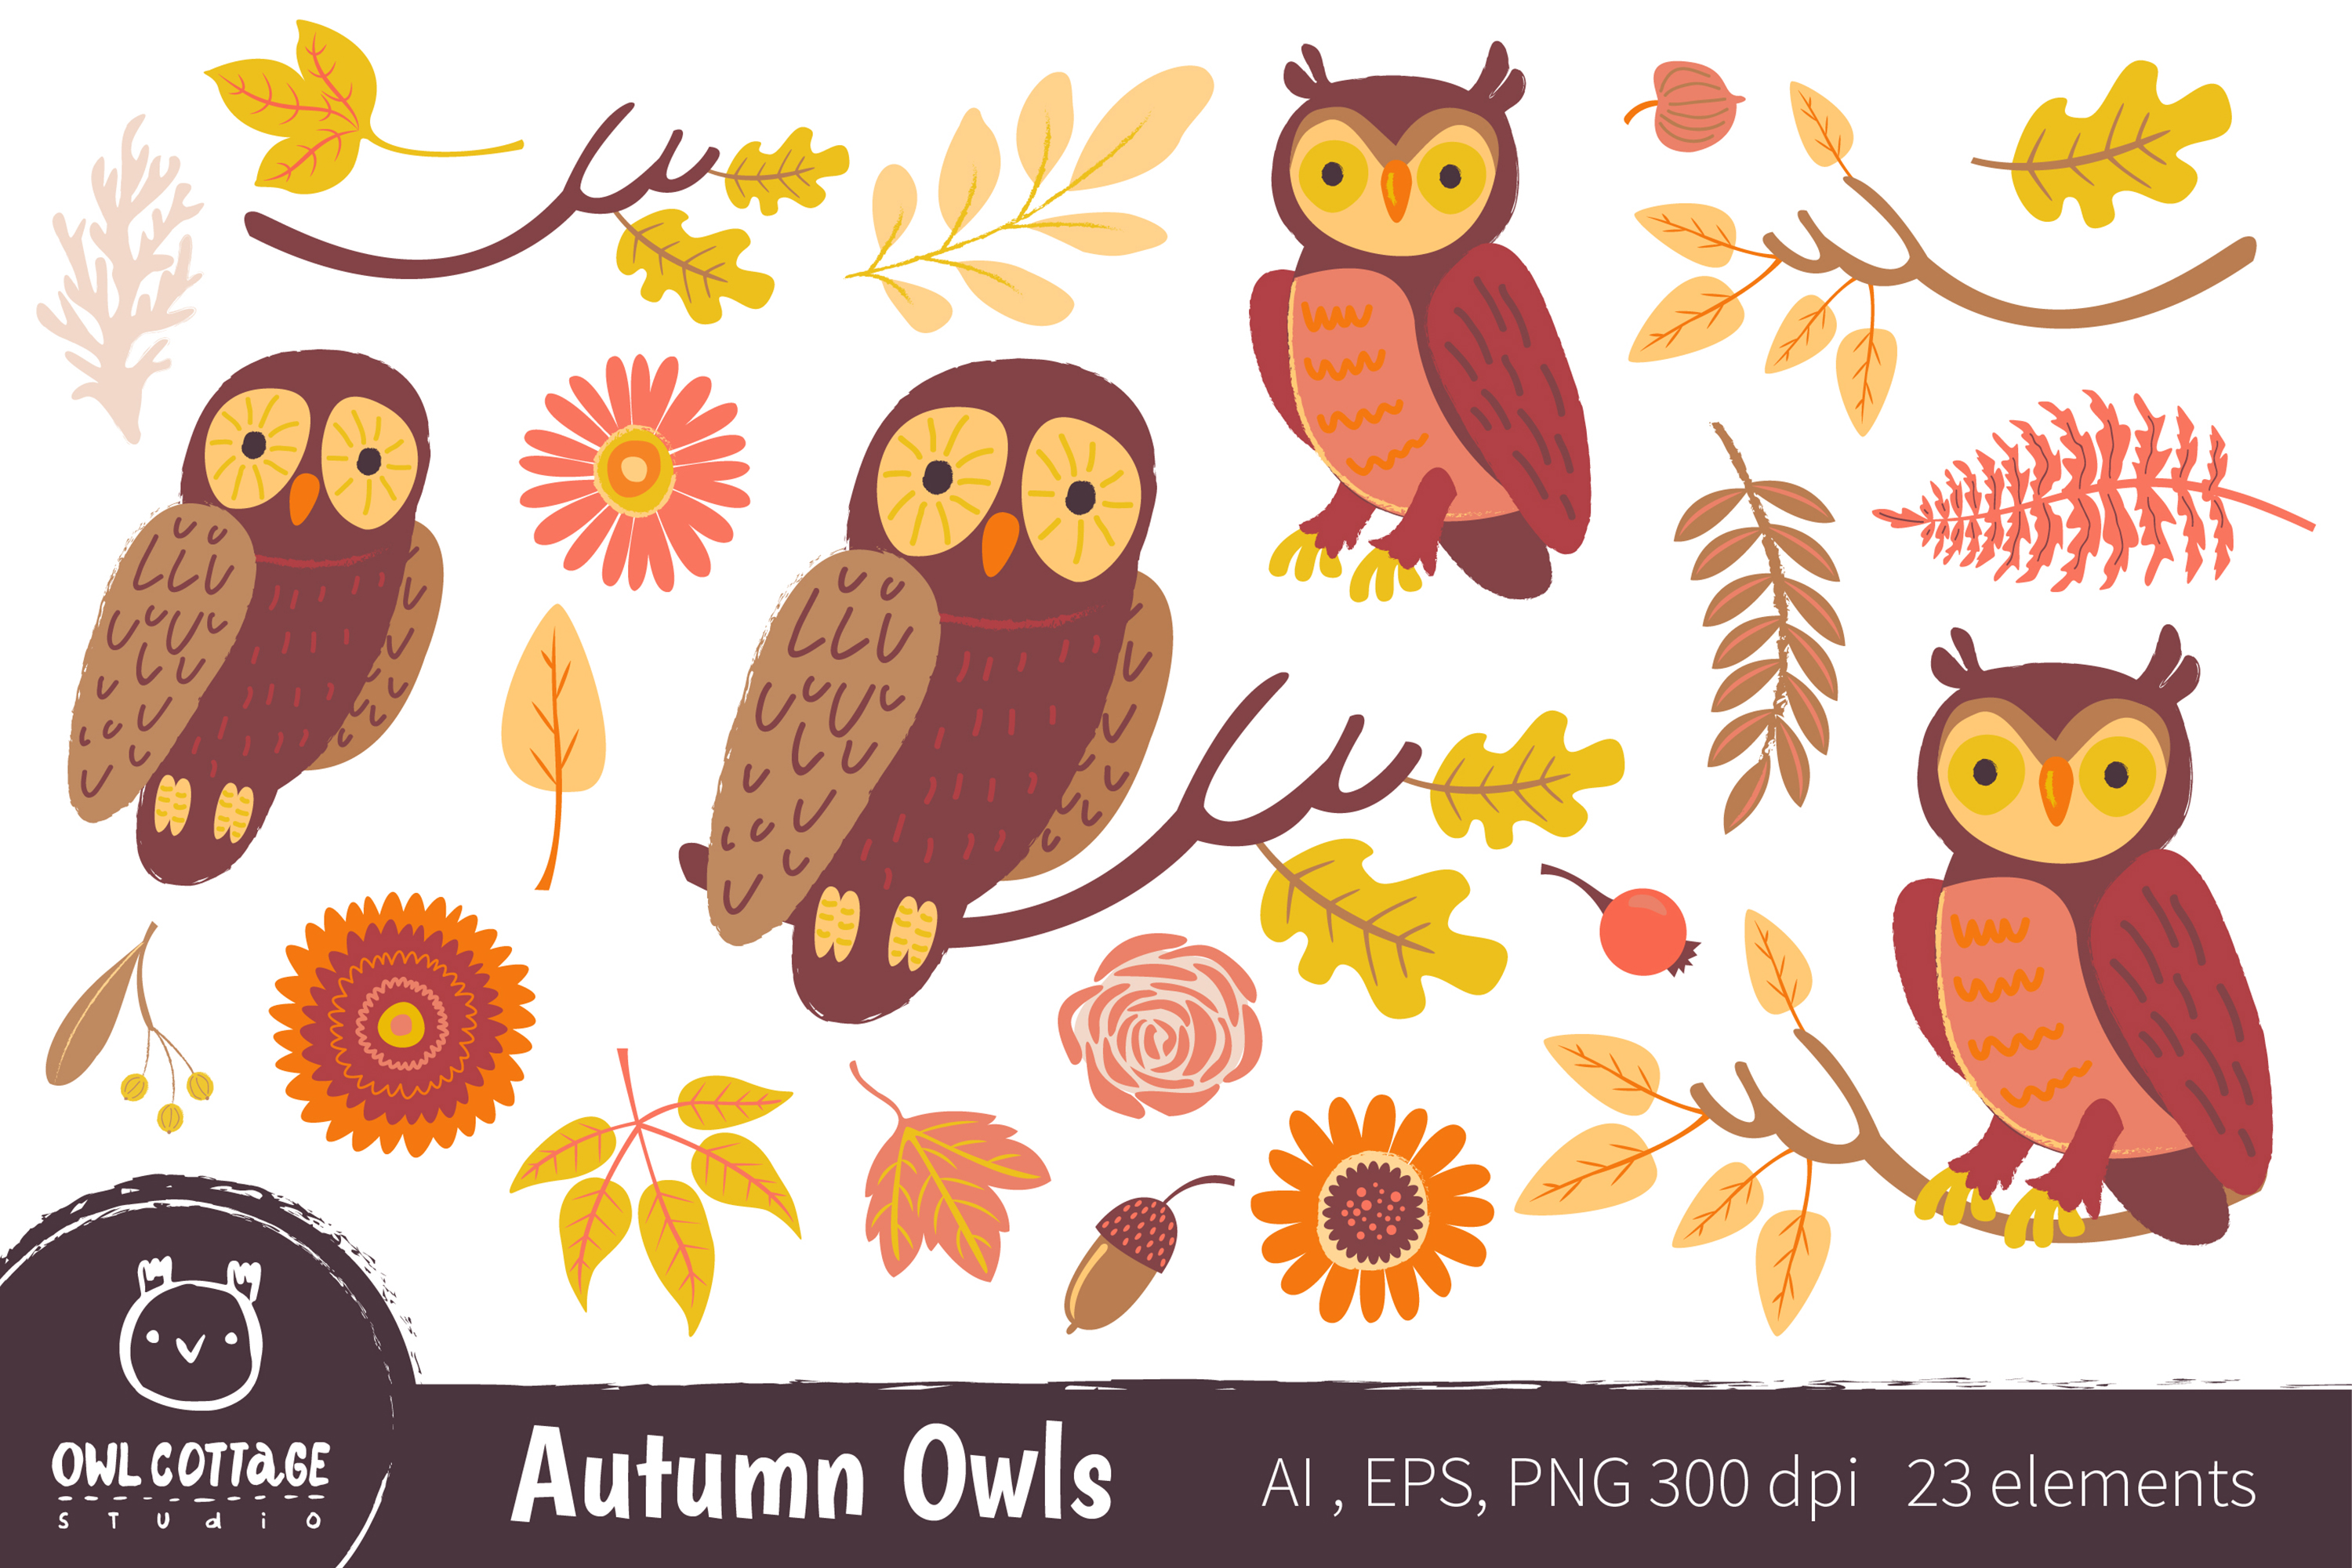 Autumn Owls and Fall Elements, Woodland Animals Clipart